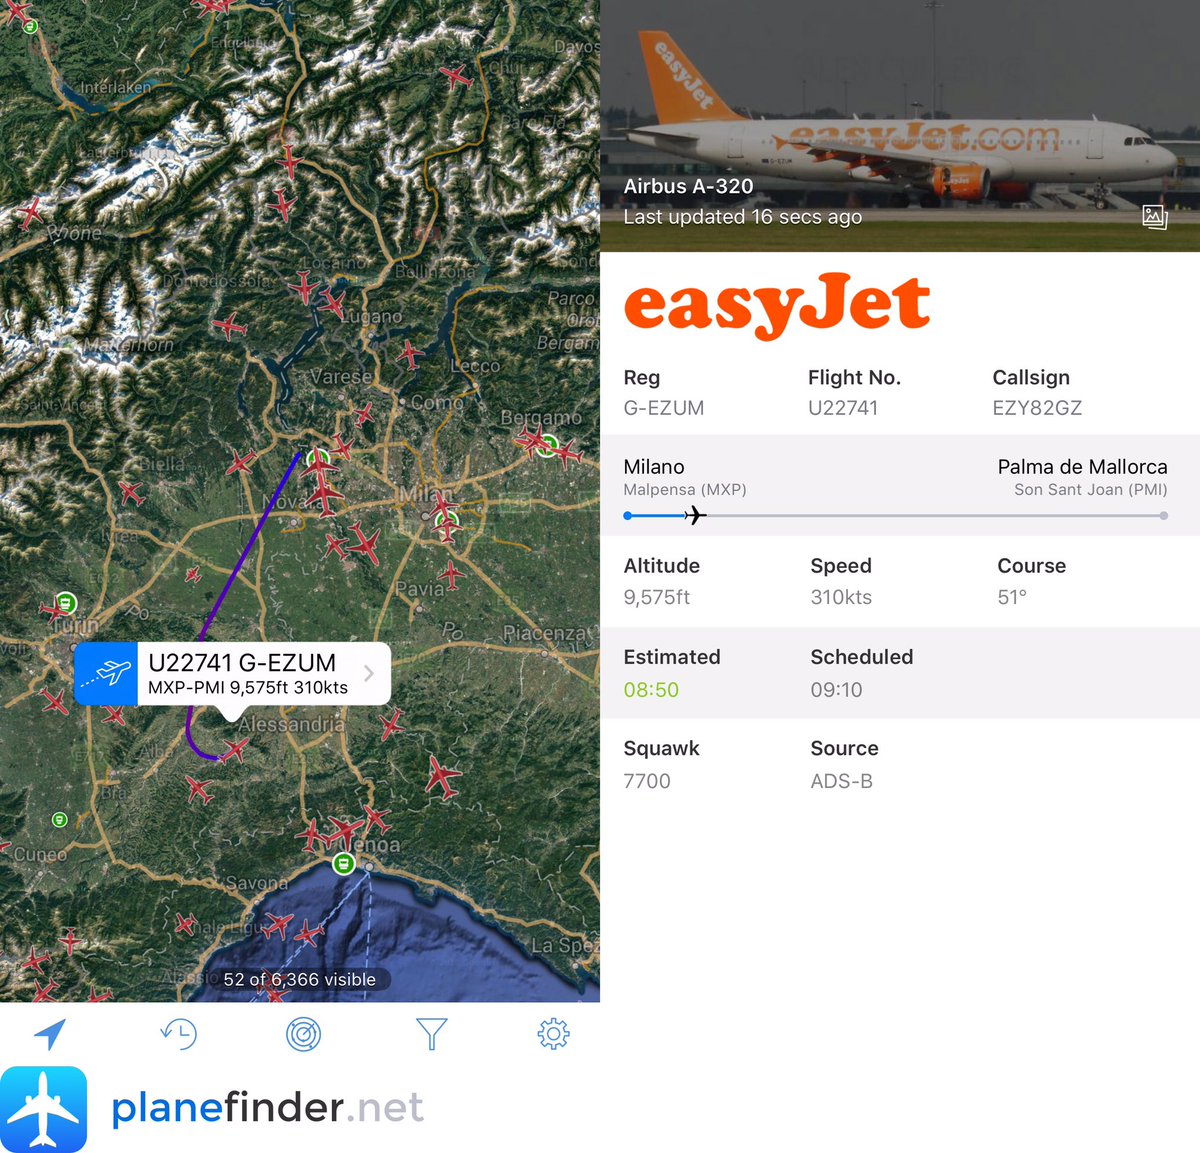 LIVE: Easyjet #U22741 has declared an emergency & diverting-cause unknown #airlivenet via @planefinder